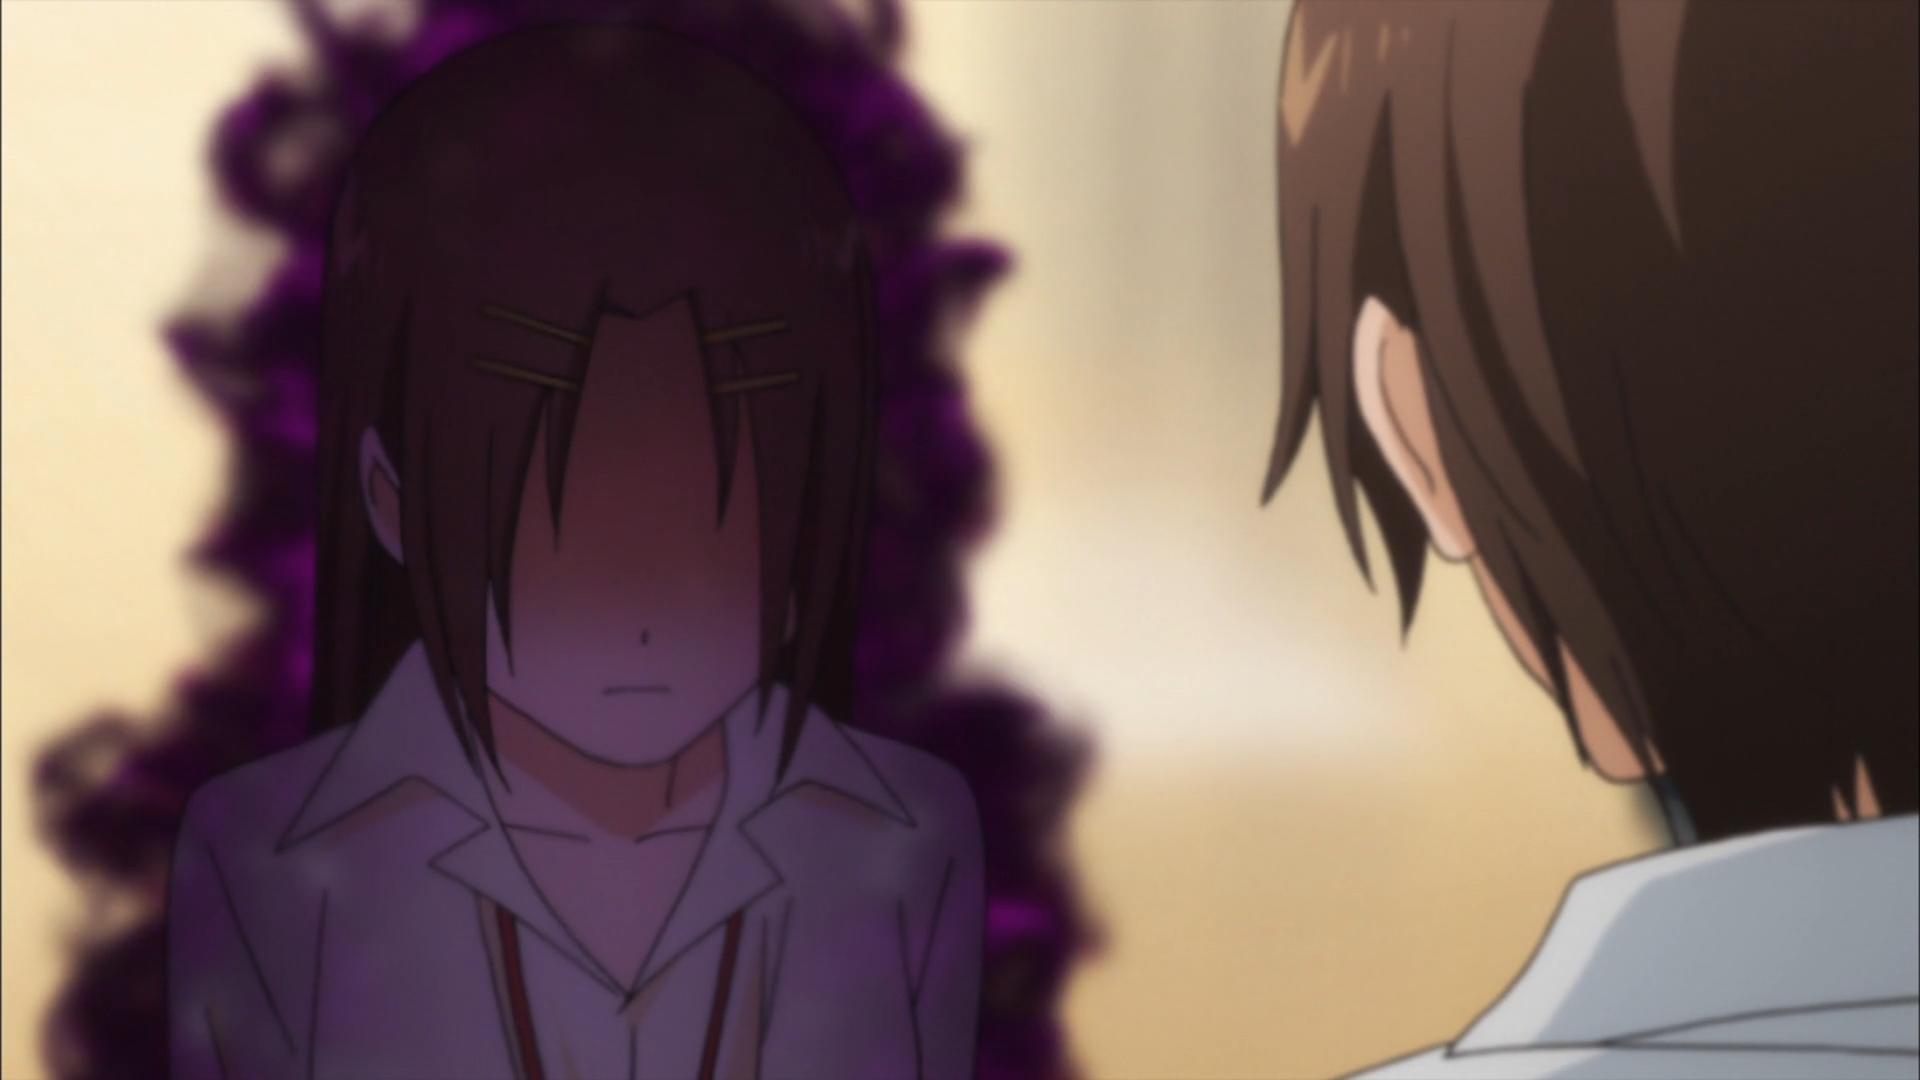 A Love Confessions for Ayanokoji In This 'Classroom of the Elite' 2nd  Season Anime Dub Clip